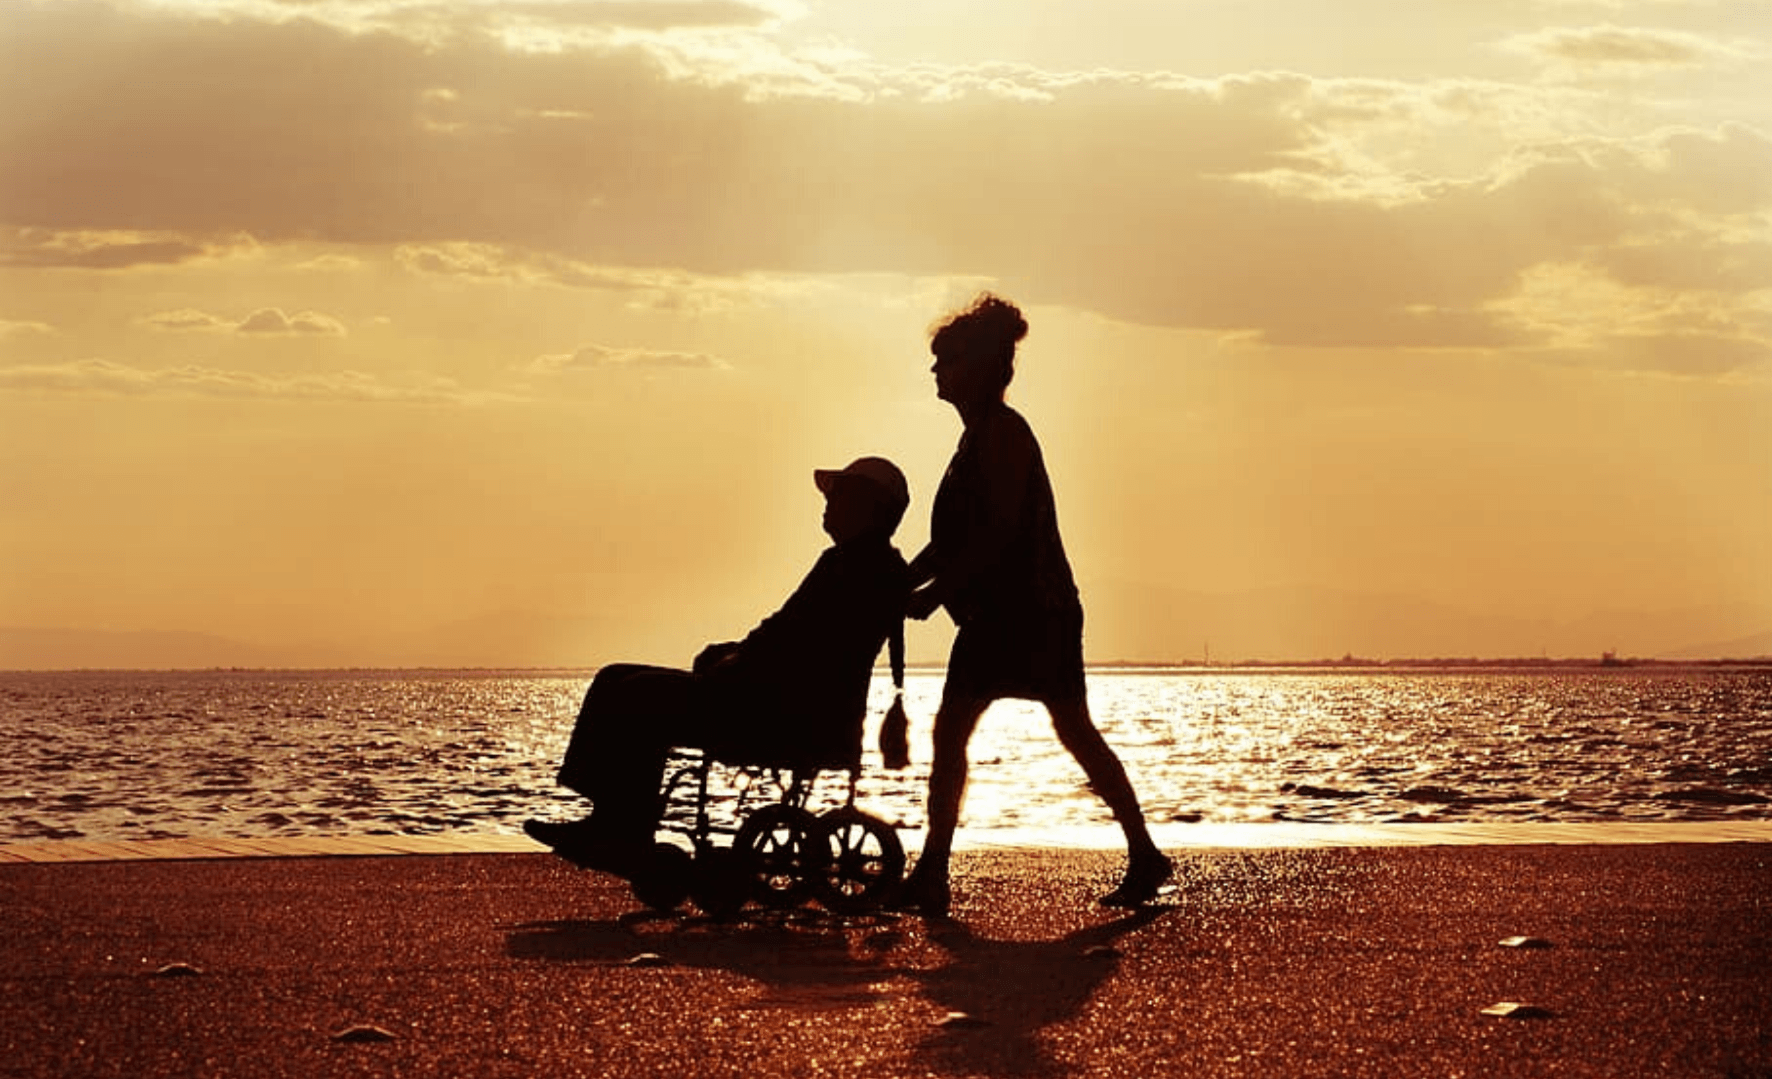 Silhouette of a lady pushing a man on a wheelchair at a beach.